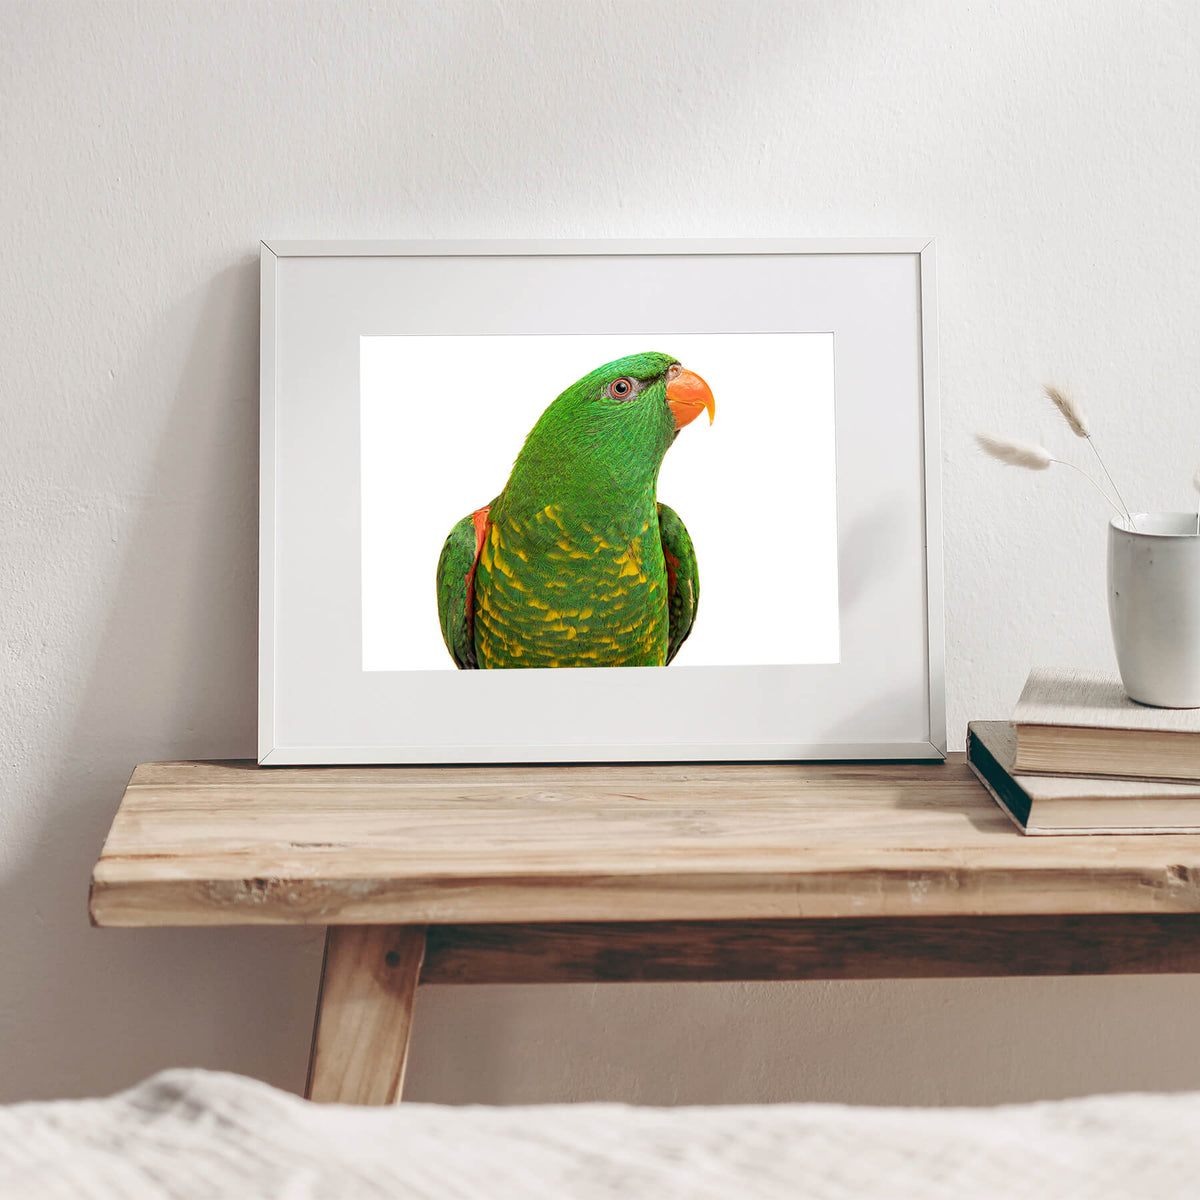 Gary, the Scaly-breasted Lorikeet